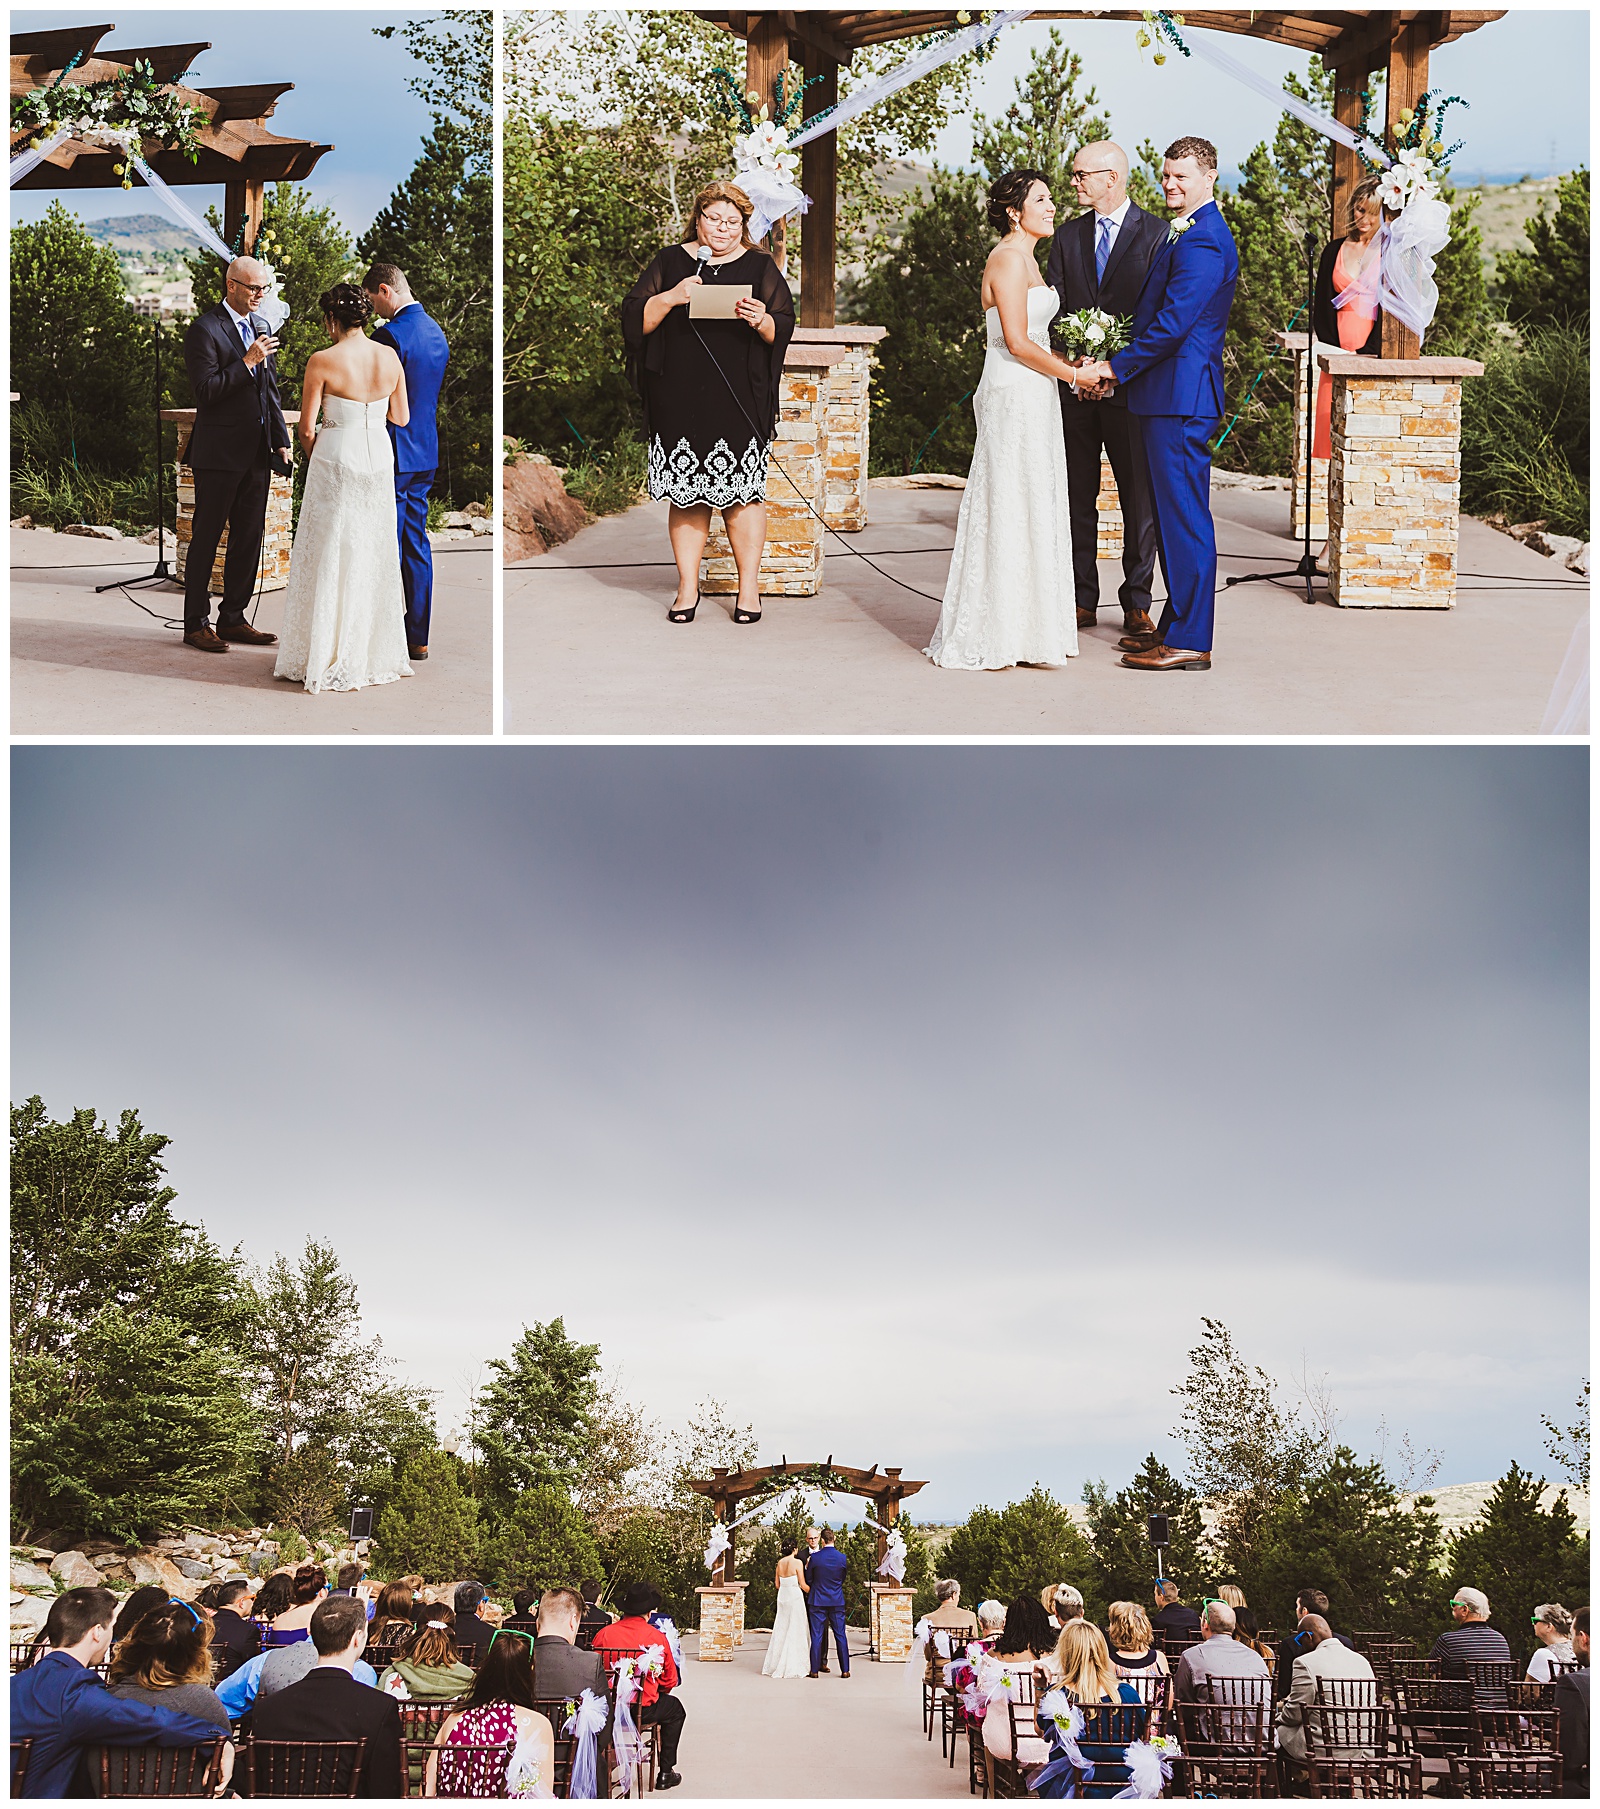 fall ceremony at willow ridge manor in morrison, co